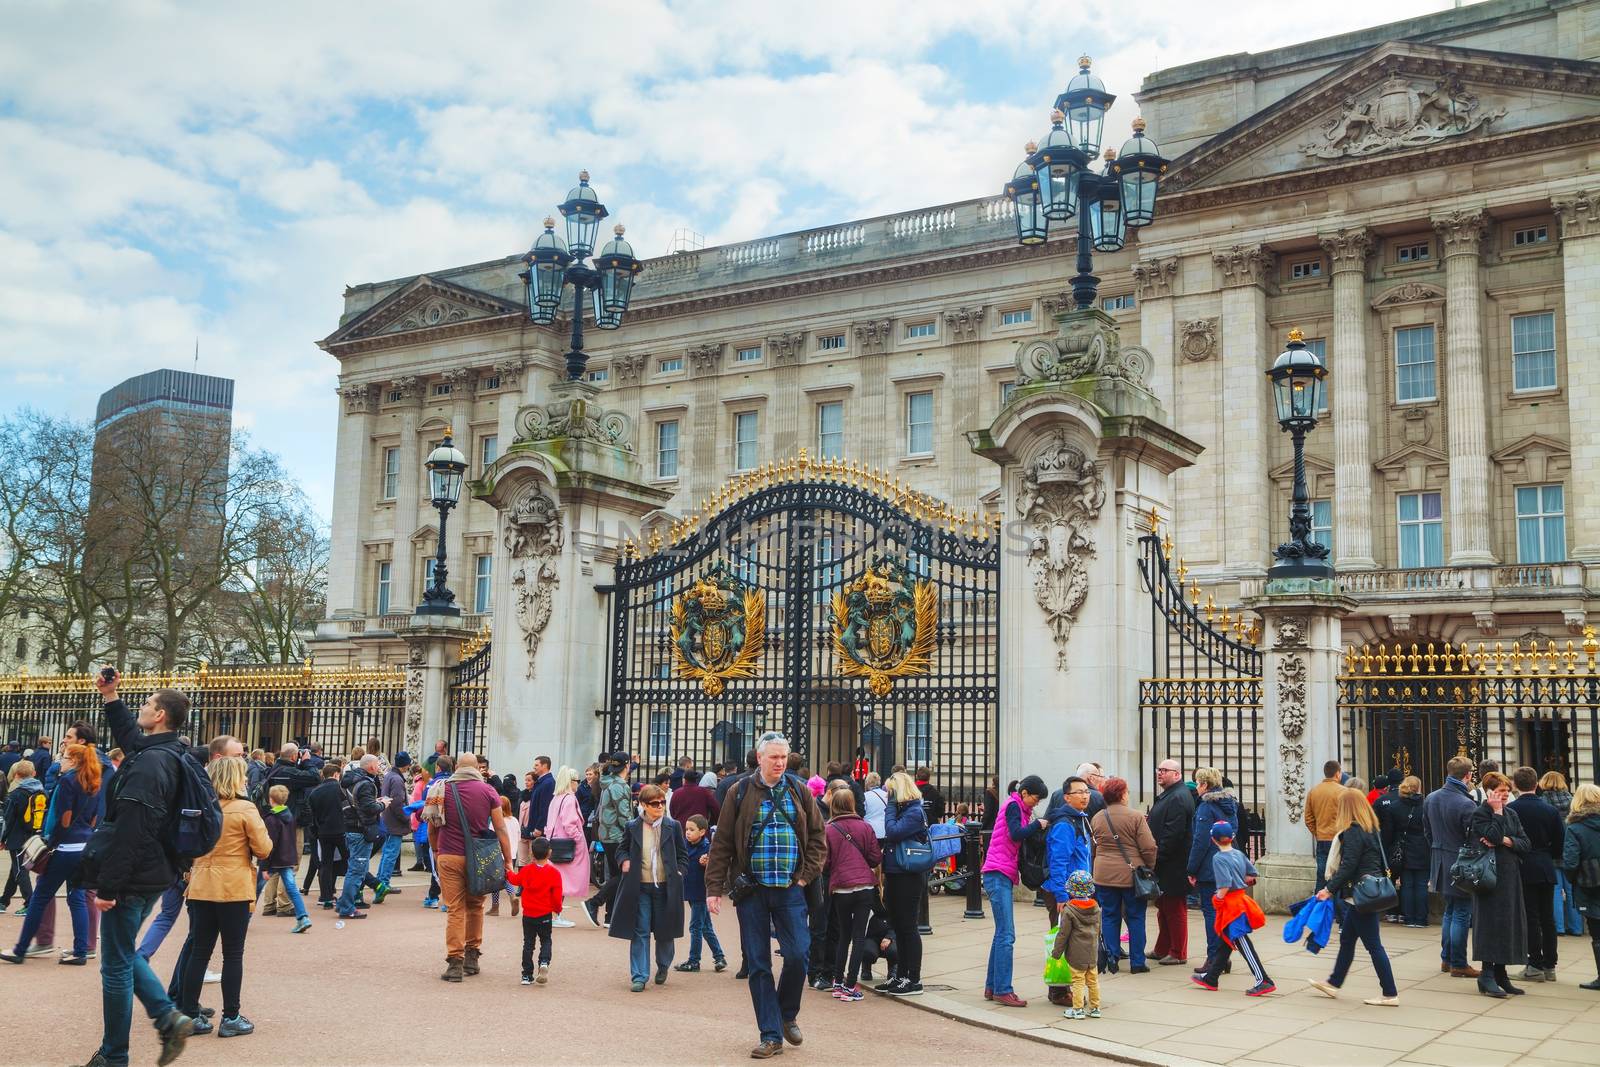 LONDON - APRIL 5: Buckingham palace with crowd of tourists on April 5, 2015 in London, UK. It's the London residence and principal workplace of the monarchy of the United Kingdom.